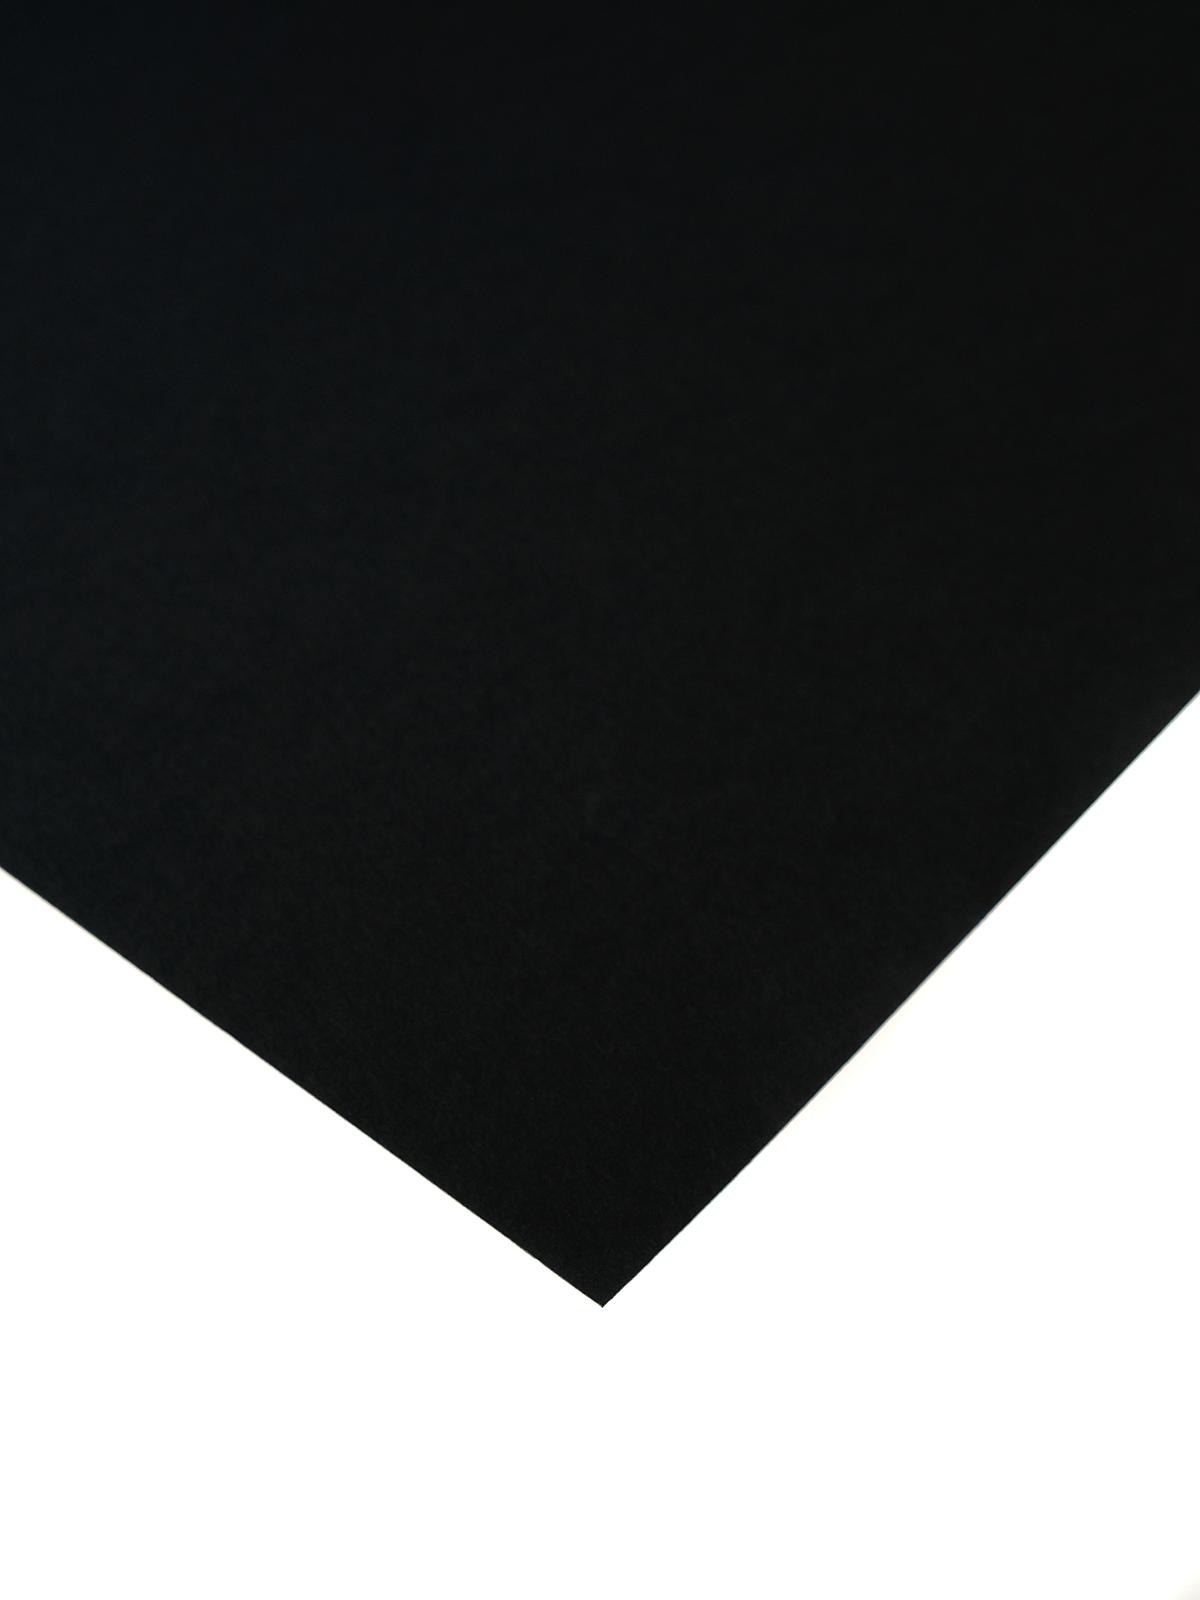 Colorline Heavyweight Paper Sheets Black 300 Gsm 19 In. X 25 In.